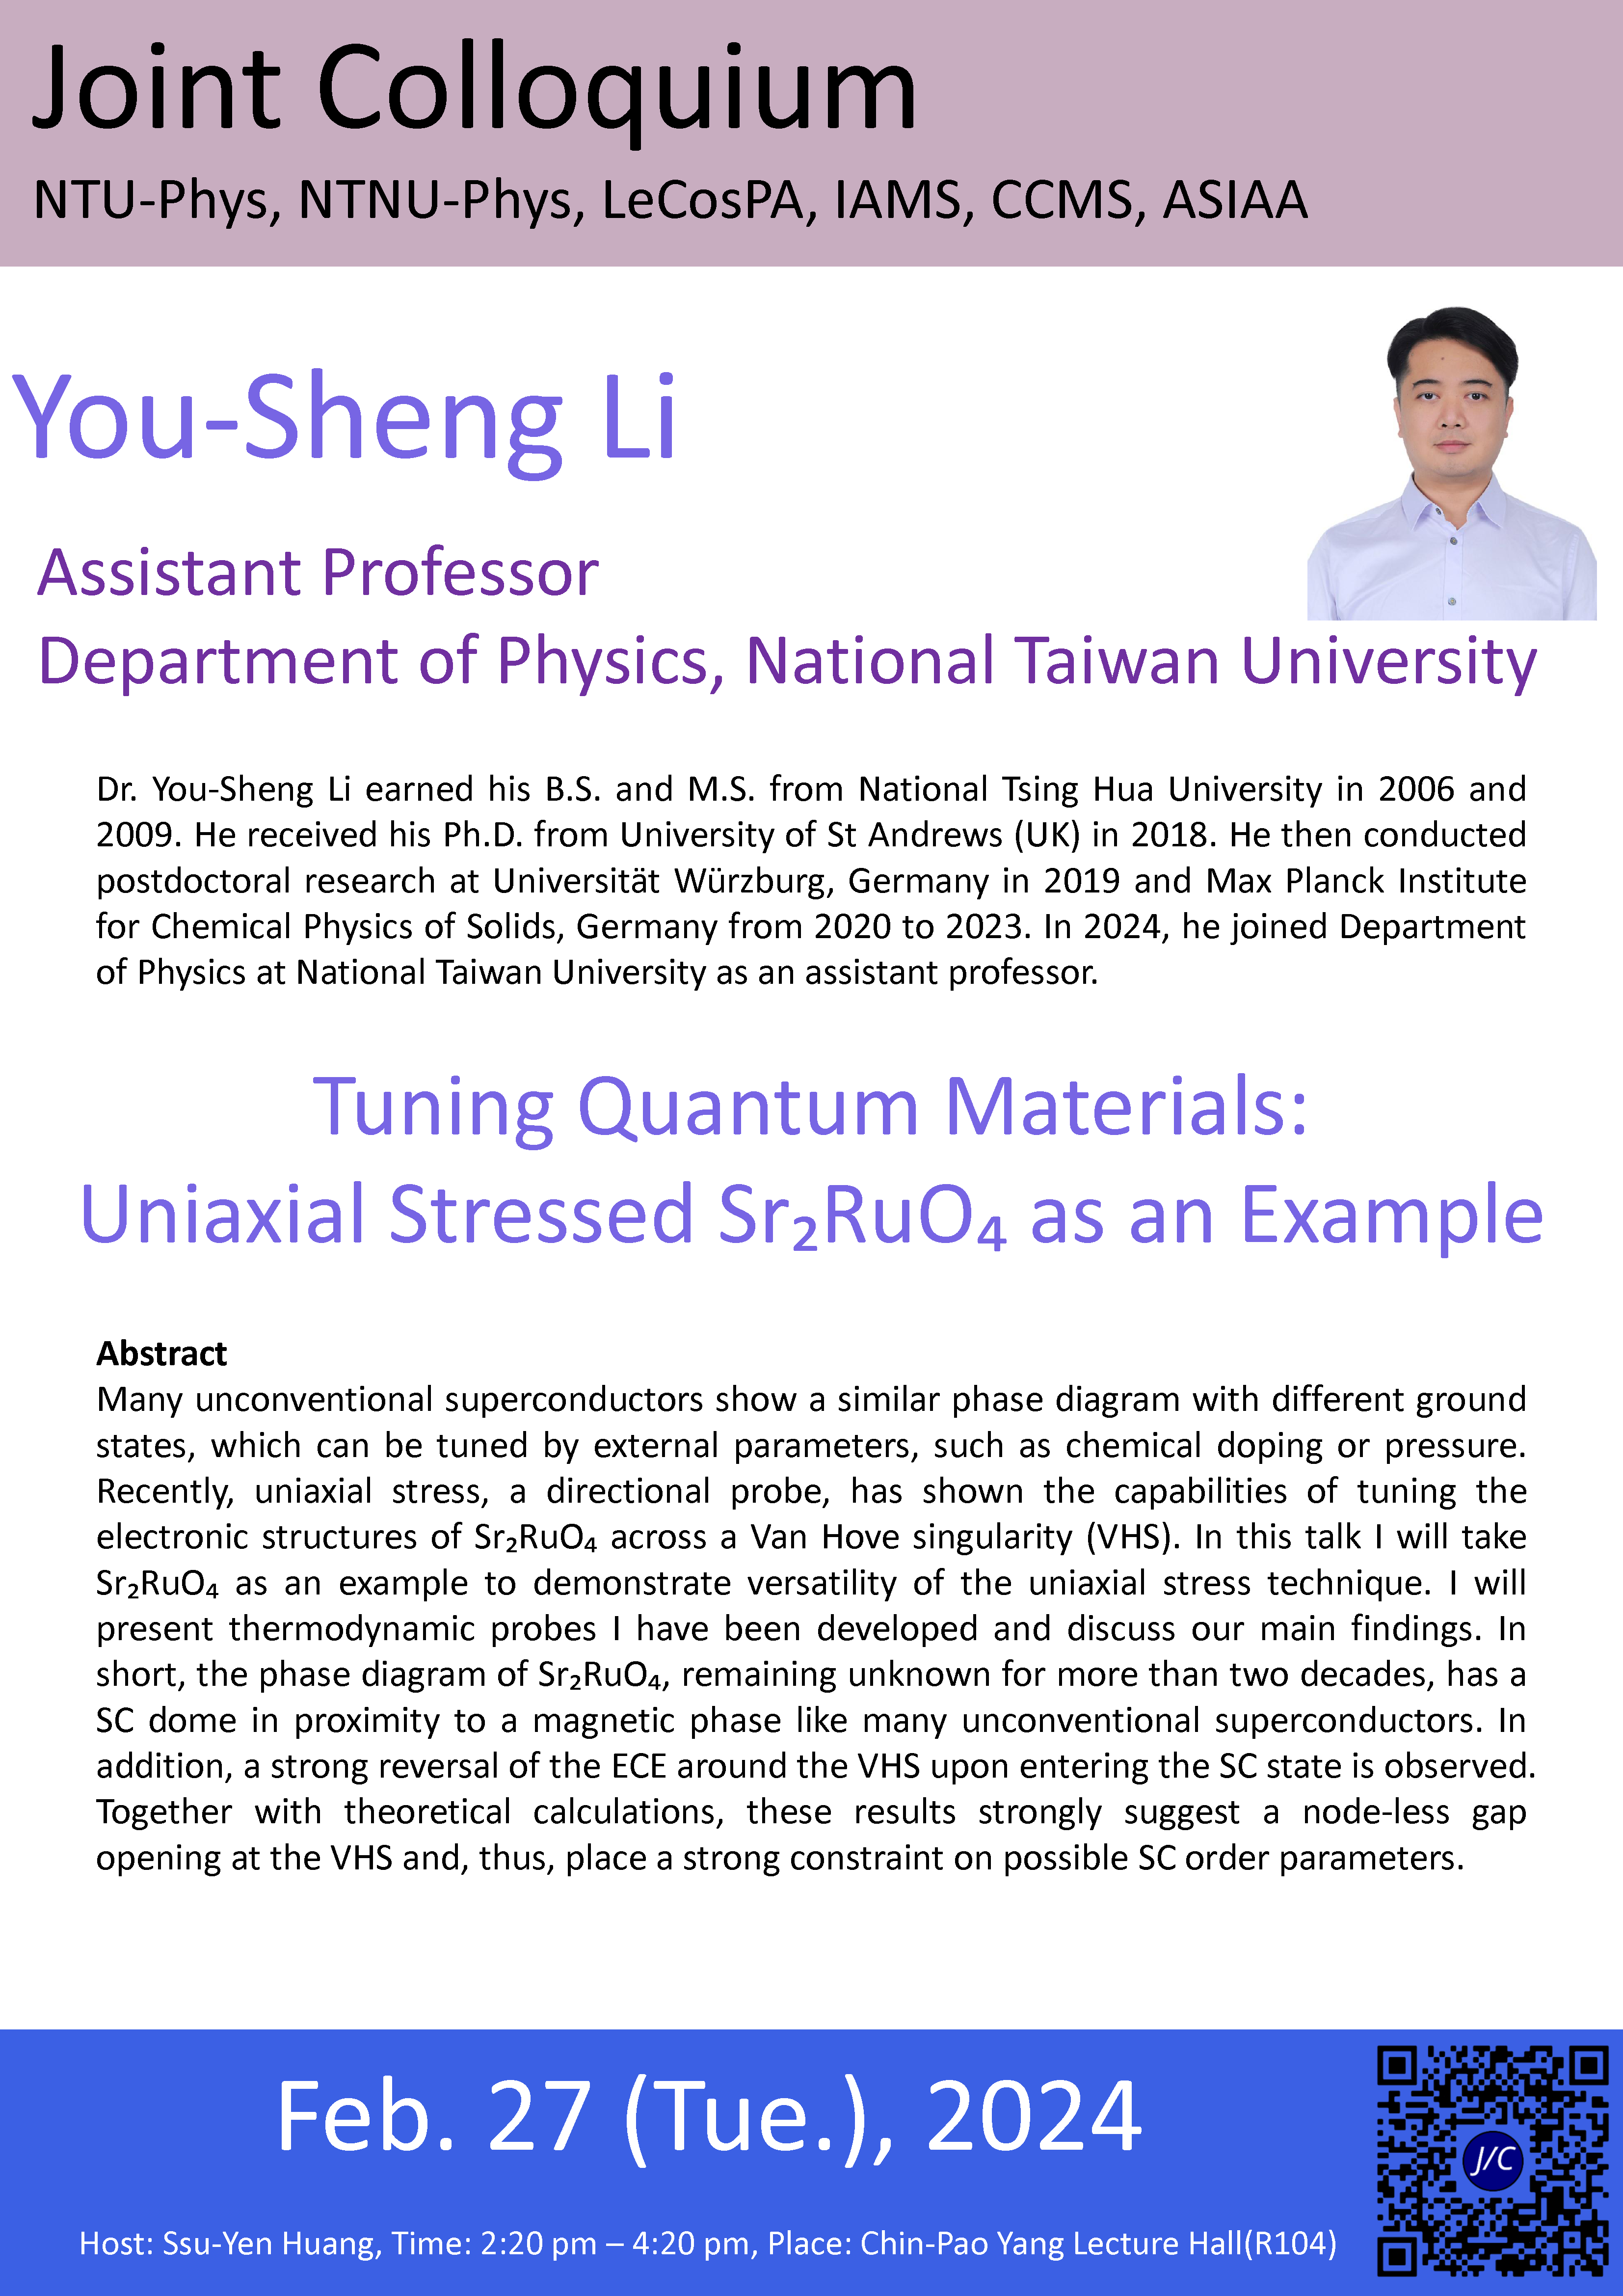 Tuning Quantum Materials: Uniaxial Stressed Sr₂RuO₄ as an Example